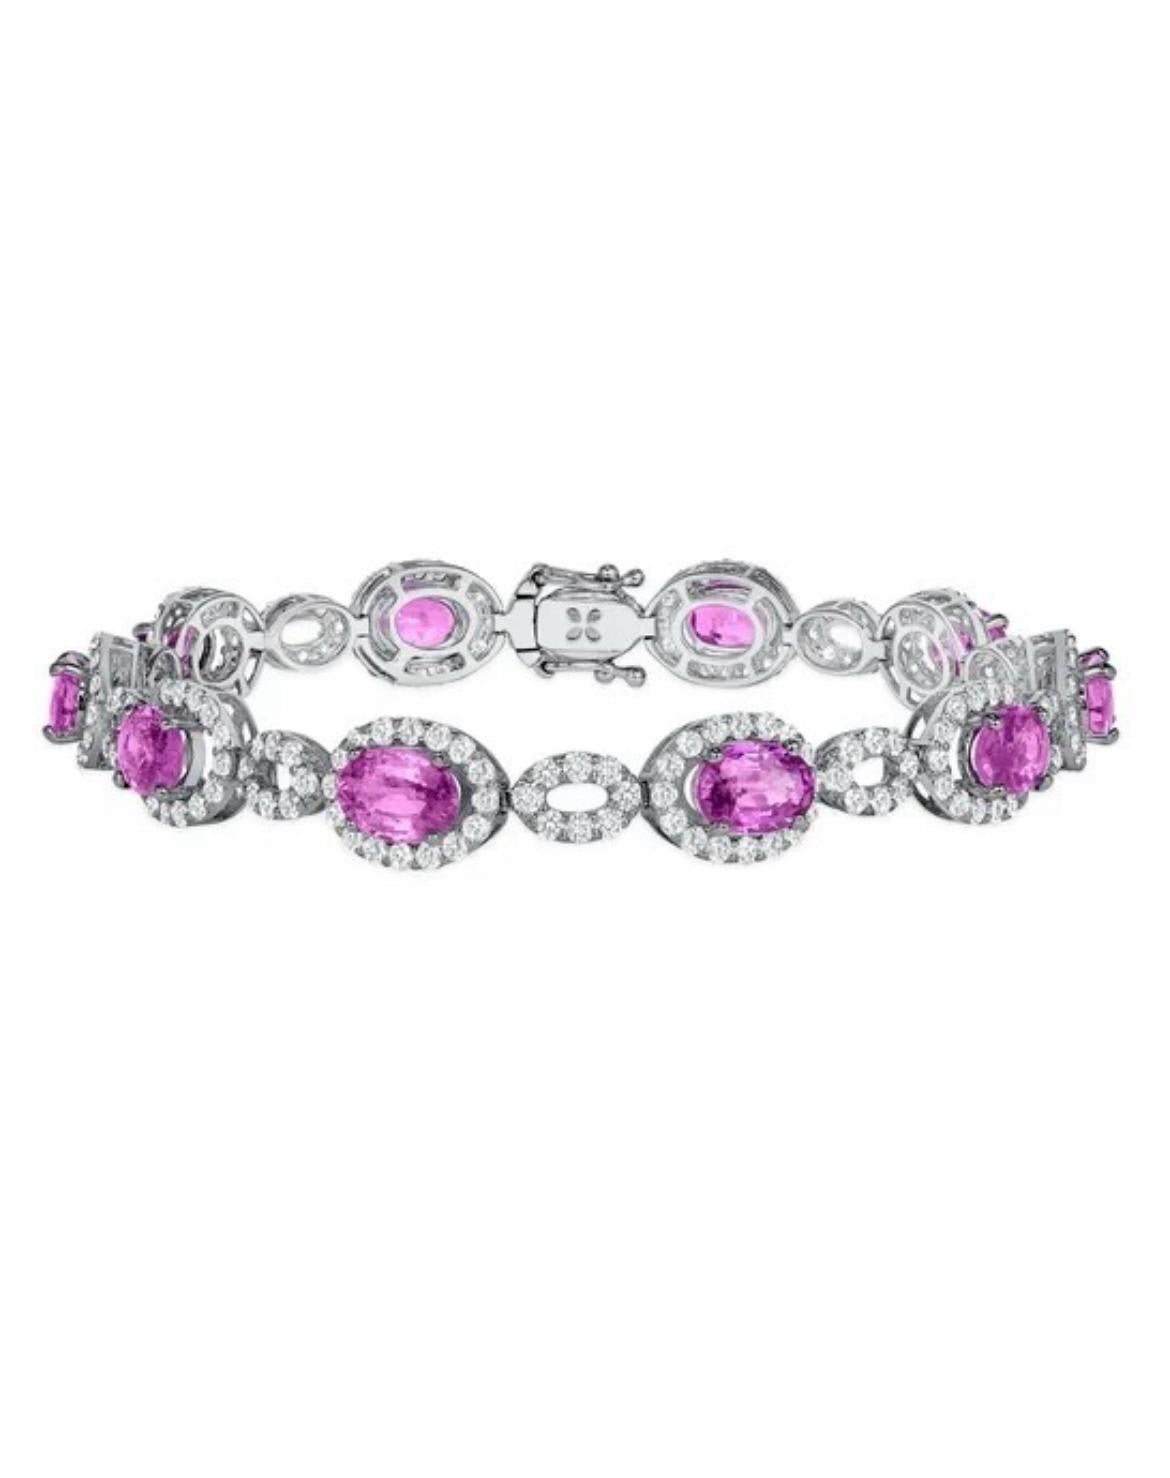 18K white gold bracelet, featuring 8.39cts of Ceylon pink sapphires, accented by 4.03cts of white diamonds. 
